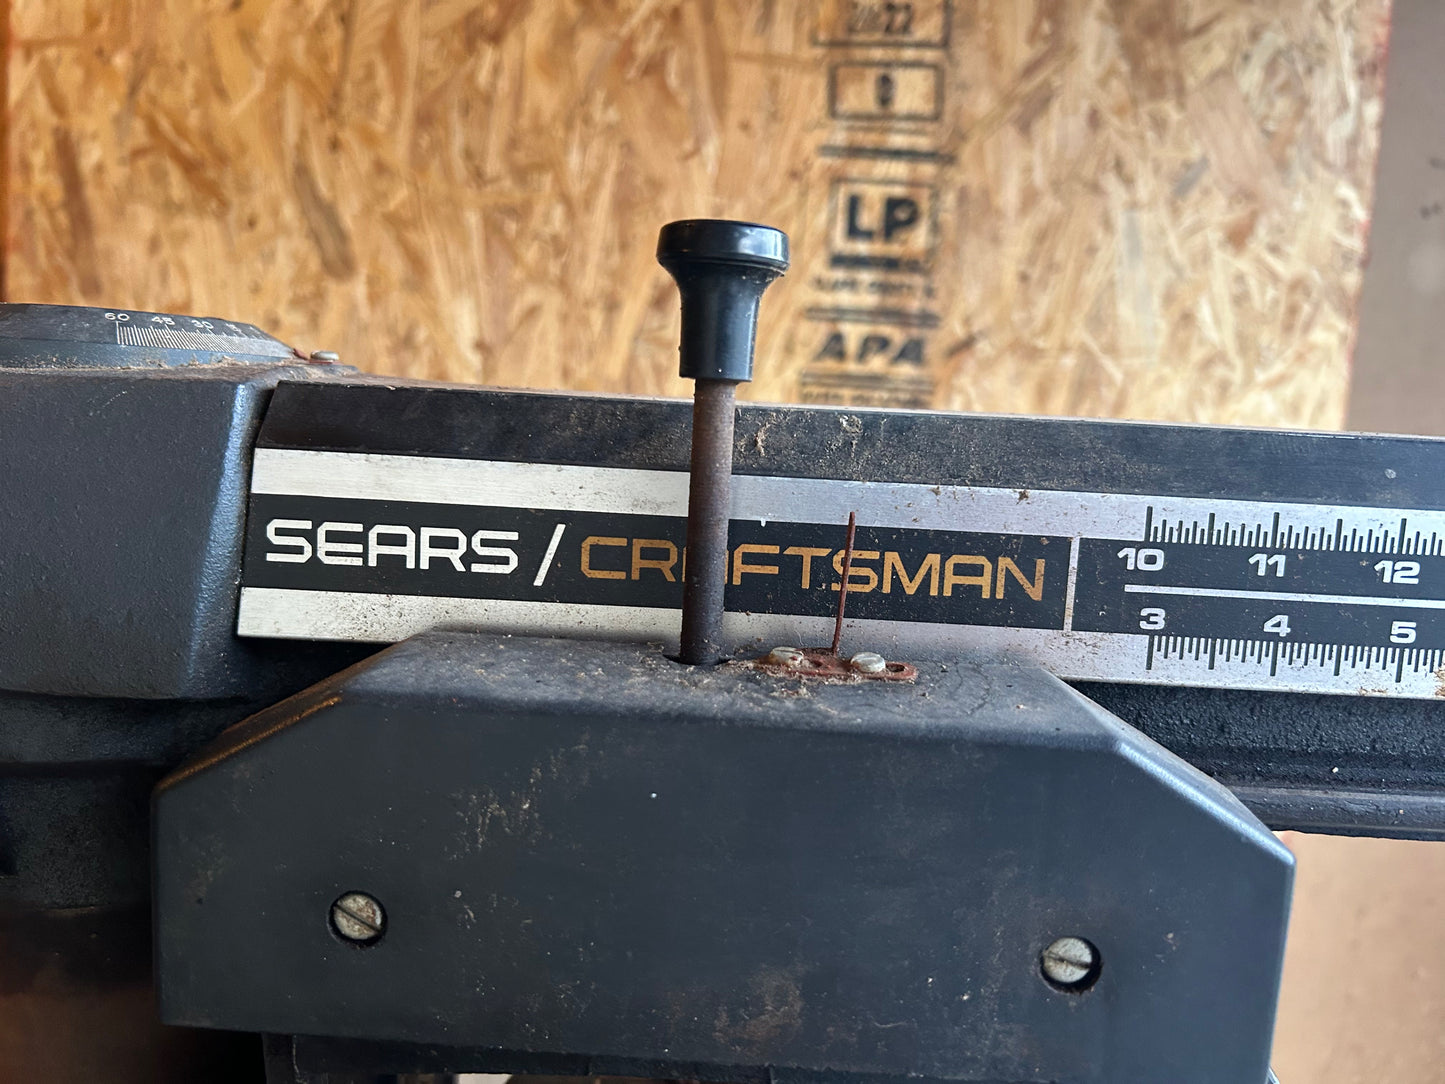 Vintage Sears Craftsman 10" Radial Arm Saw Model No 113 23100 - WORKING CONDITION